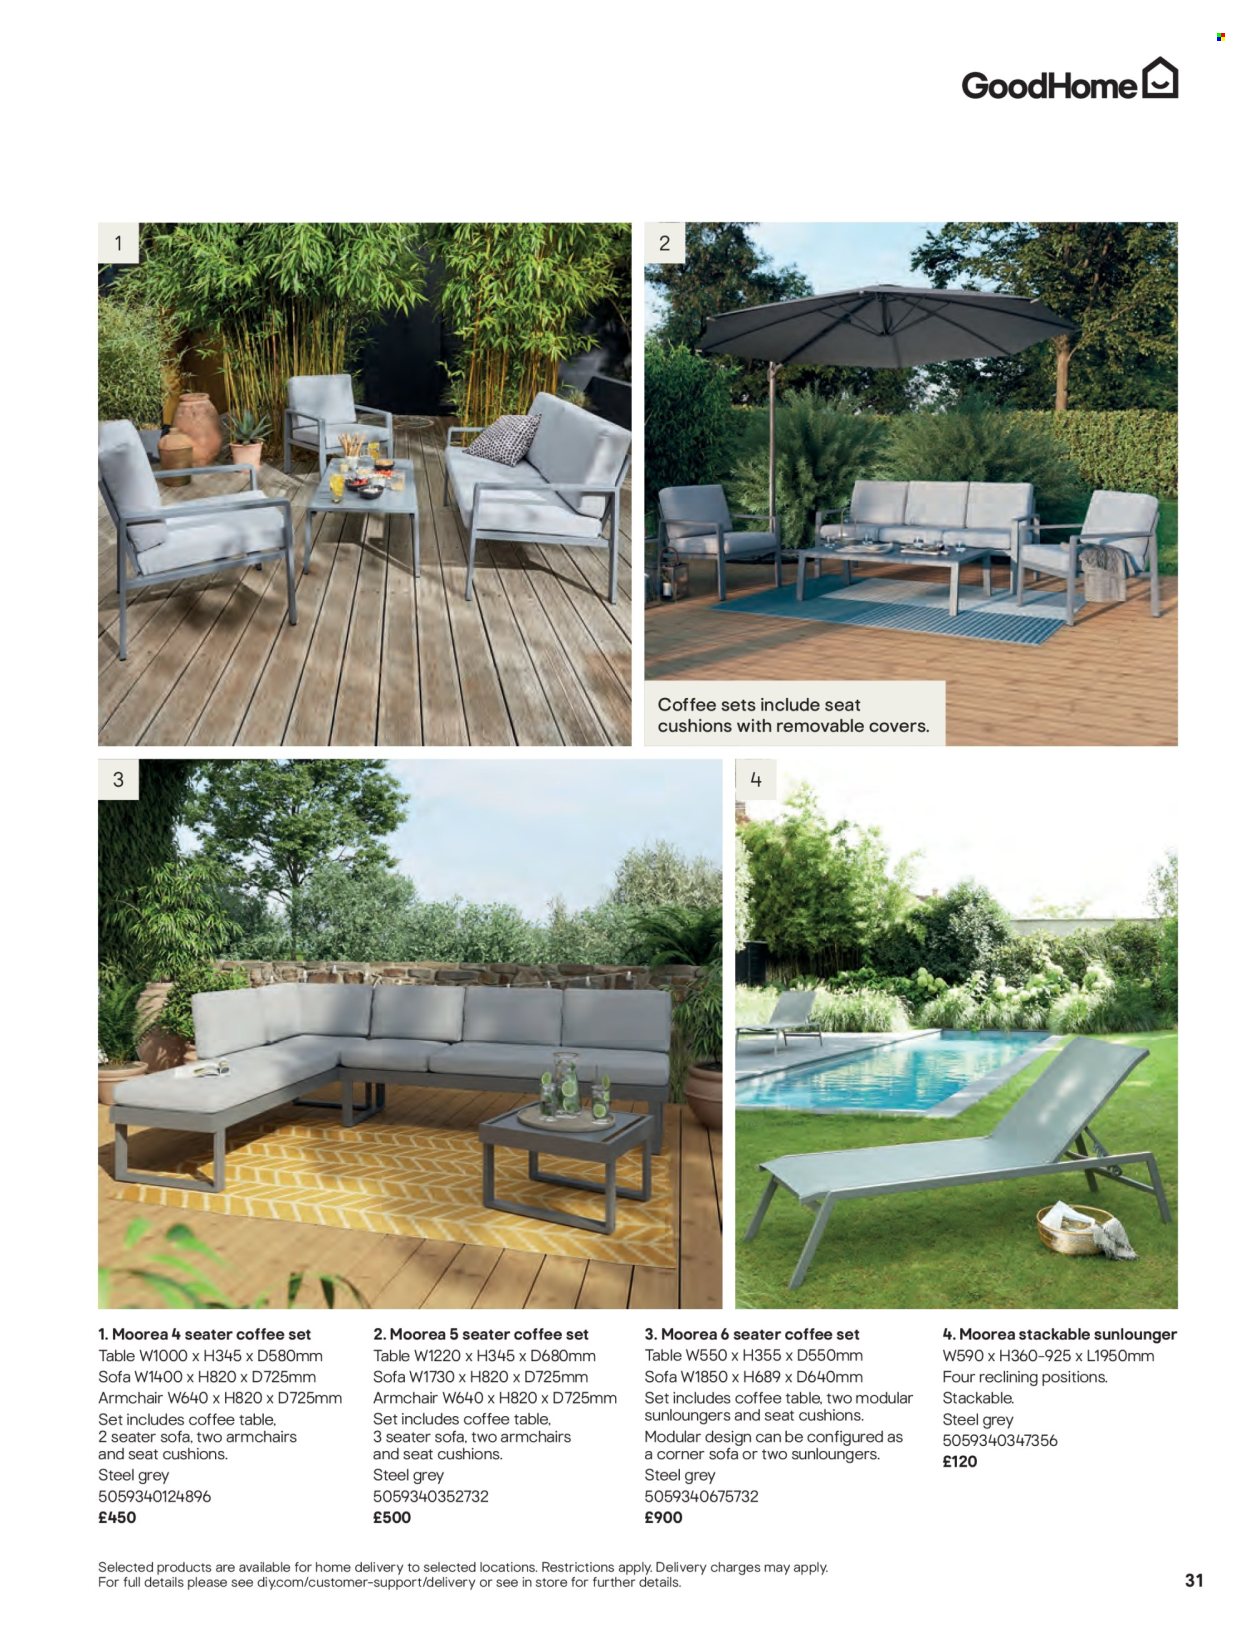 thumbnail - B&Q offer  - Sales products - cushion, table, arm chair, corner sofa, sofa, coffee table, lounger. Page 31.